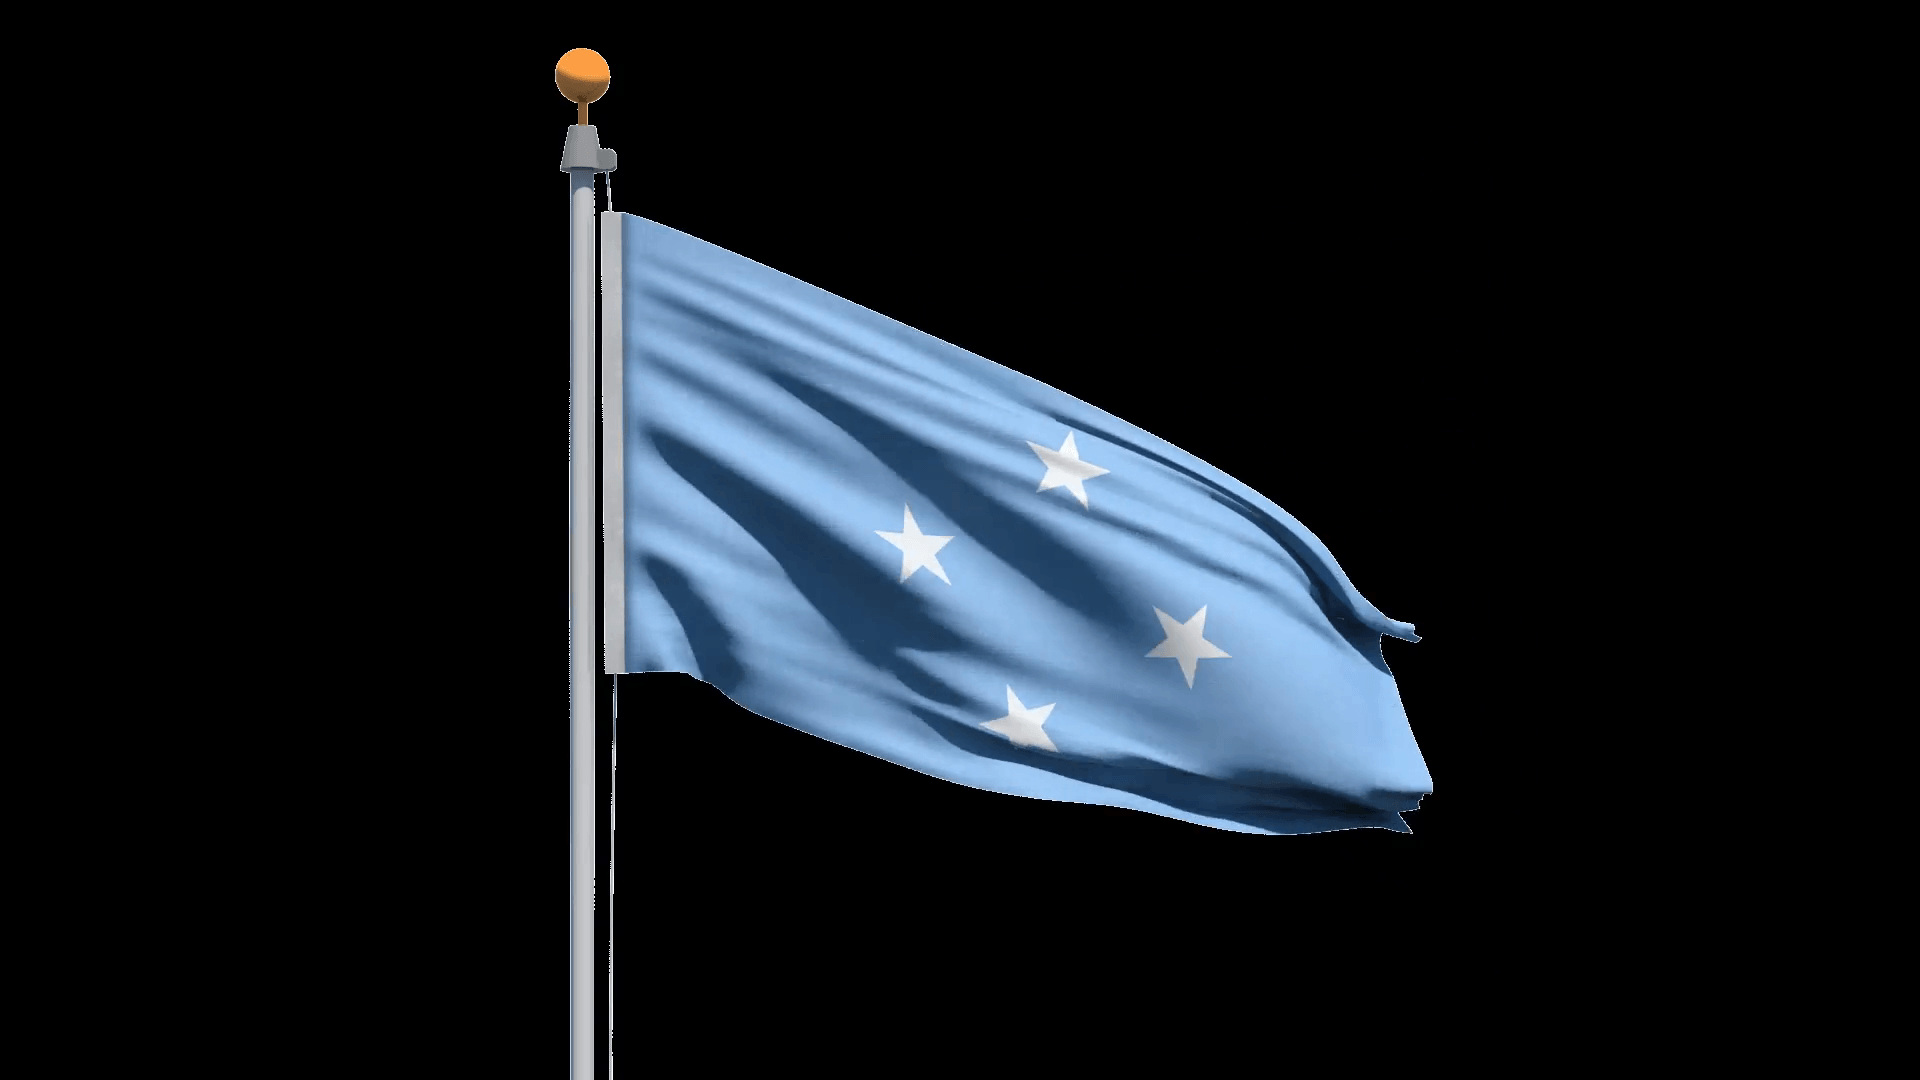 Flag of the Federated States of Micronesia waving in the wind